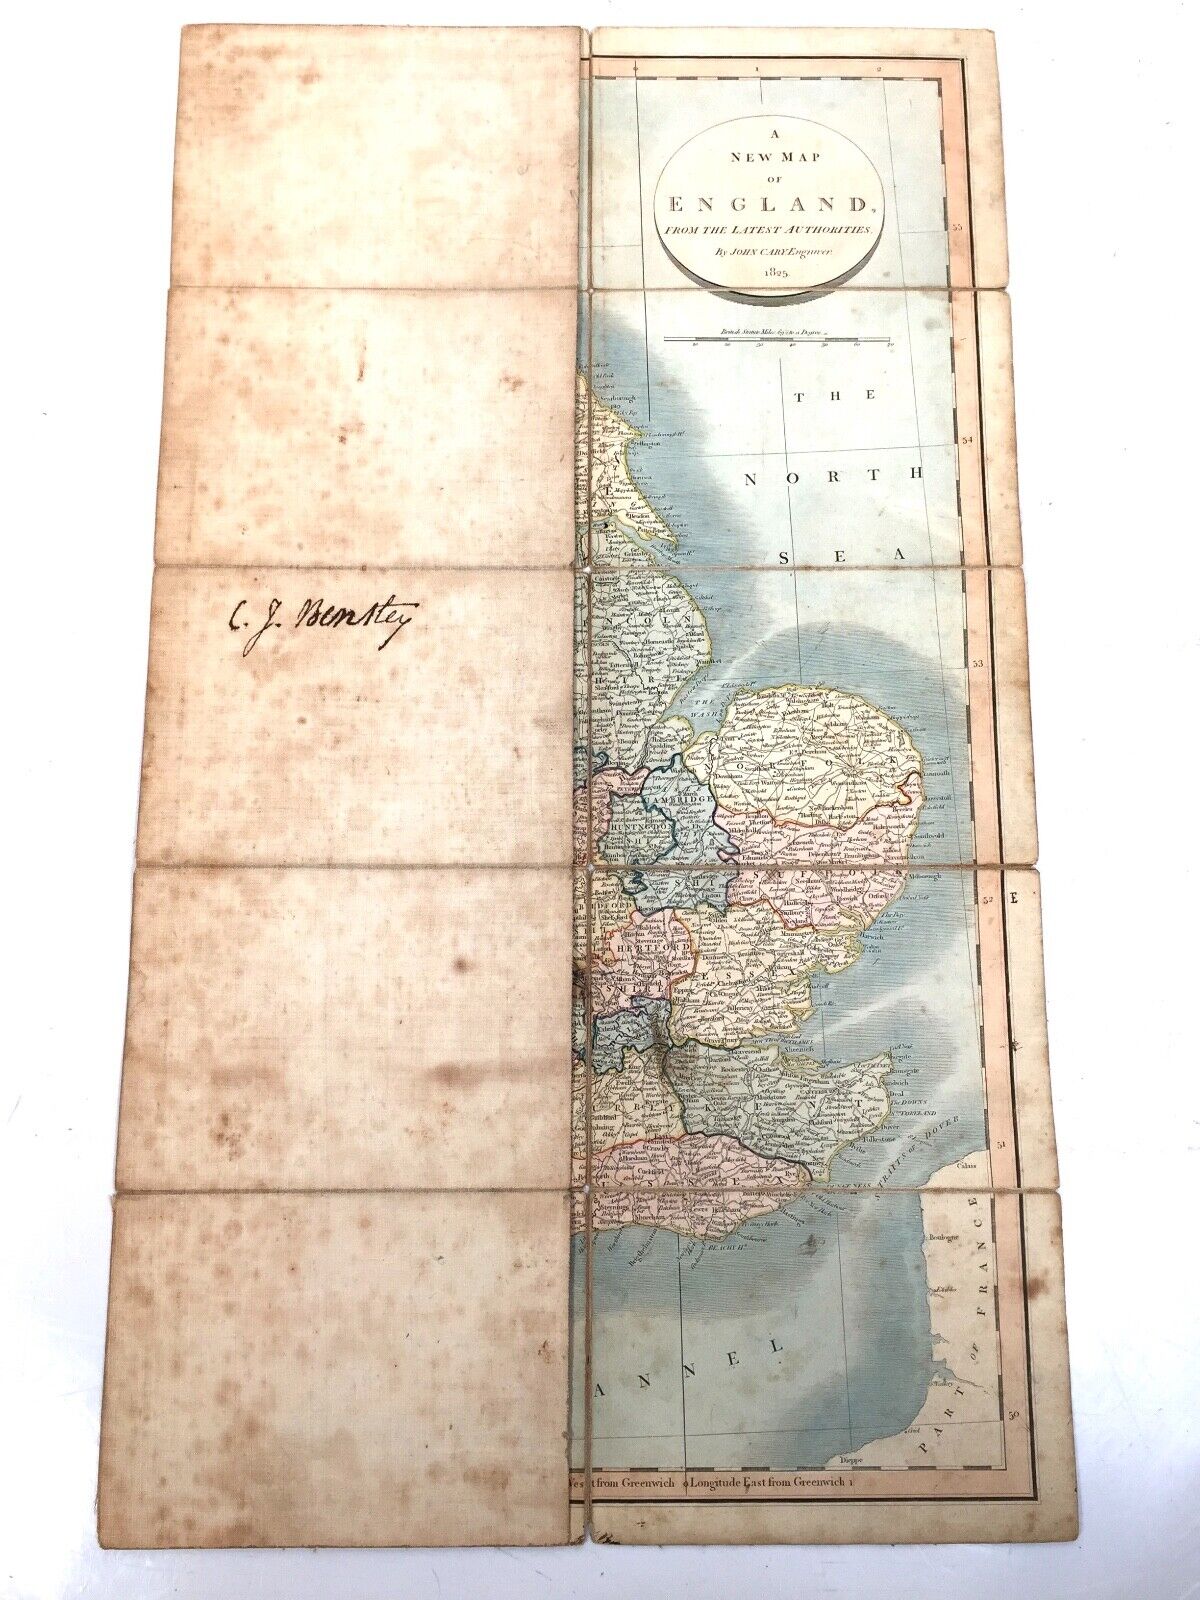 A New Map of England From The Latest Authorities By John Cary / Antique 1825